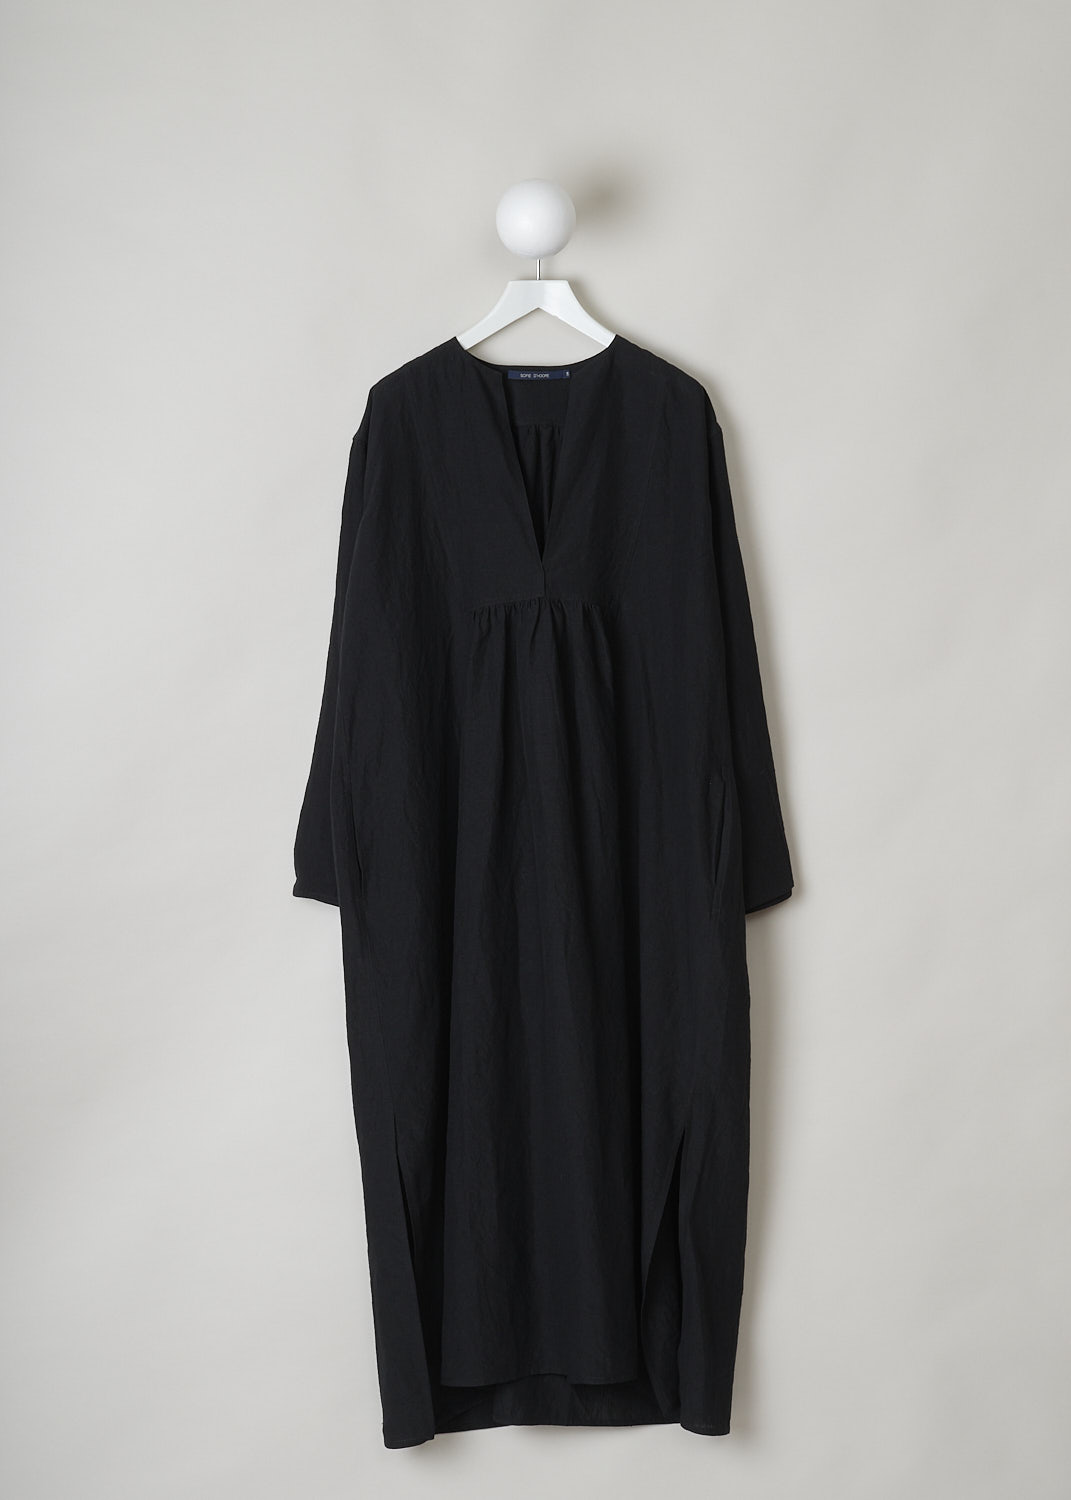 SOFIE Dâ€™HOORE, BLACK LINEN DELIZA DRESS, DELIZA_LIFE_BLACK, Black, Front,This black linen dress has a round neckline that goes into a deep V cutout. Subtle ruching can be found beneath the V. This long sleeve midi dress has a straight hemline with an asymmetrical finish, meaning the back is a little longer than the front. The dress has concealed slanted pockets and slits can be found on either side. The dress has a wide silhouette. 
